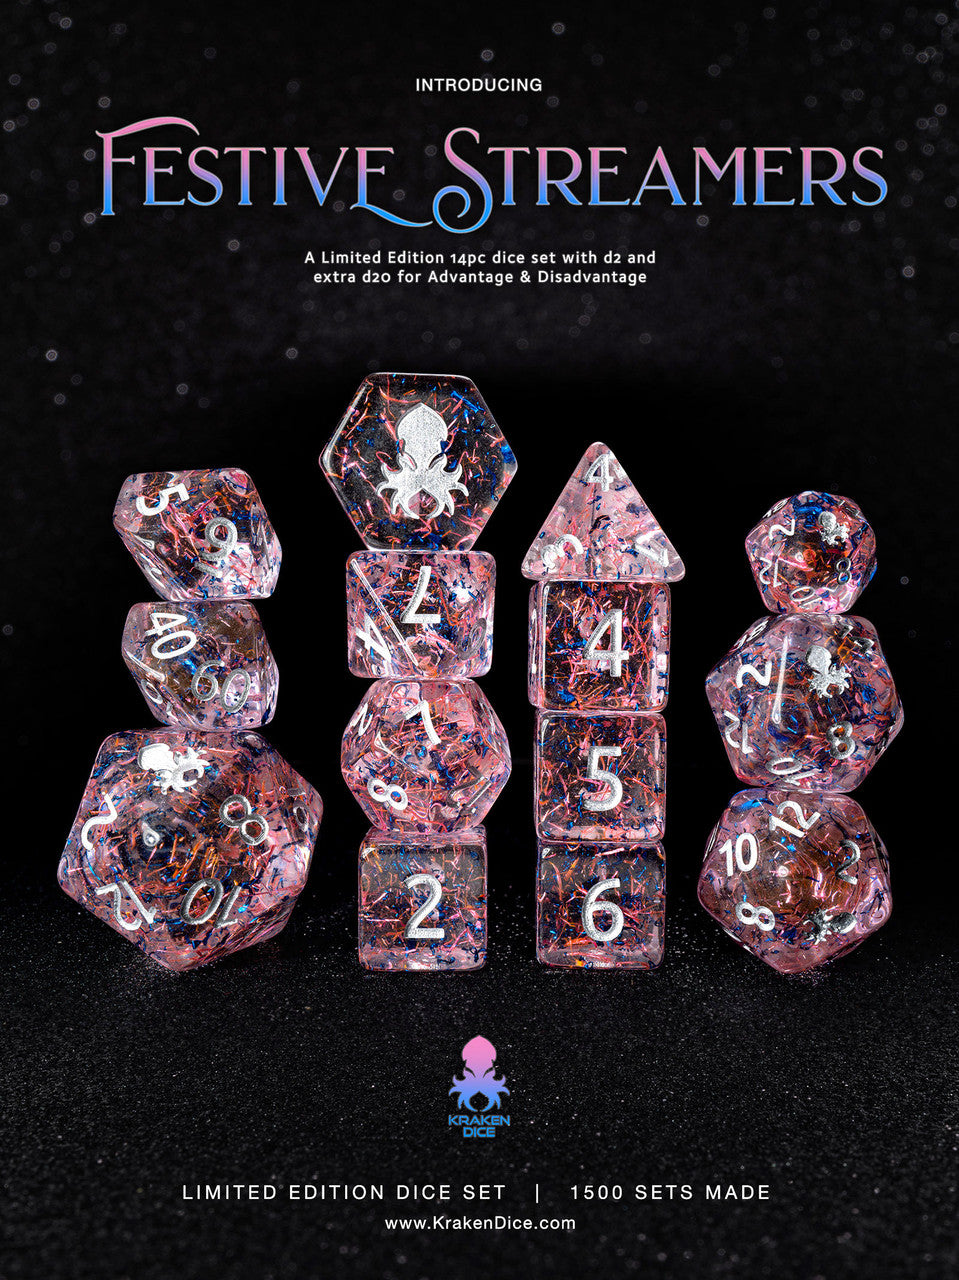 Festive Streamers 14pc Limited Edition Dice Set